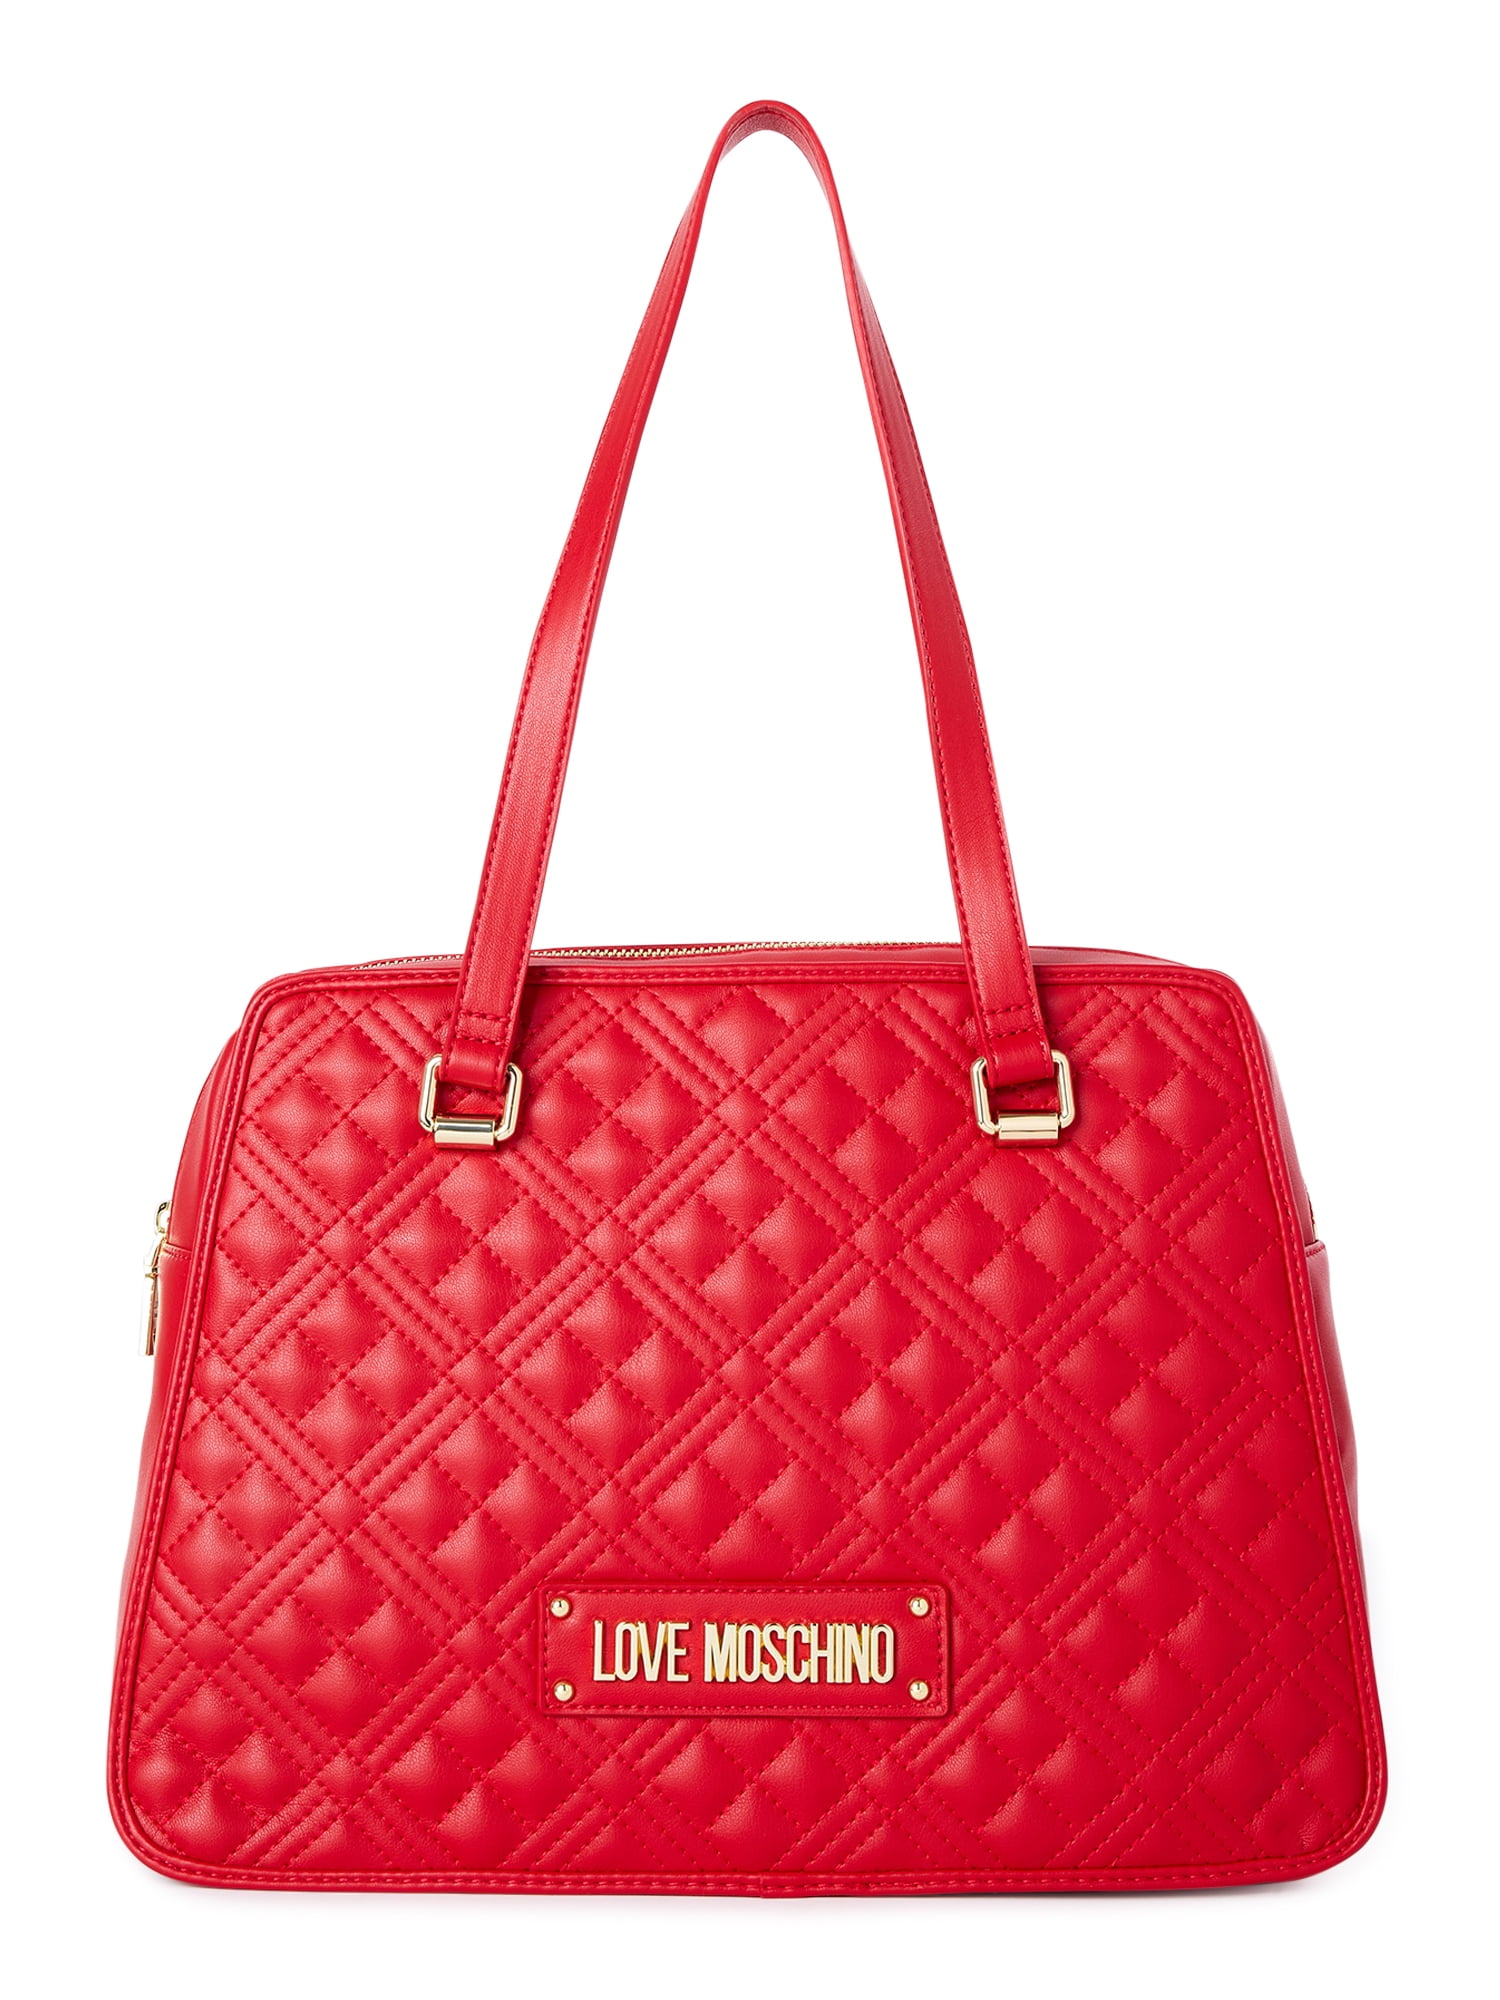 Lovely Love mini bag | Moschino Official Store